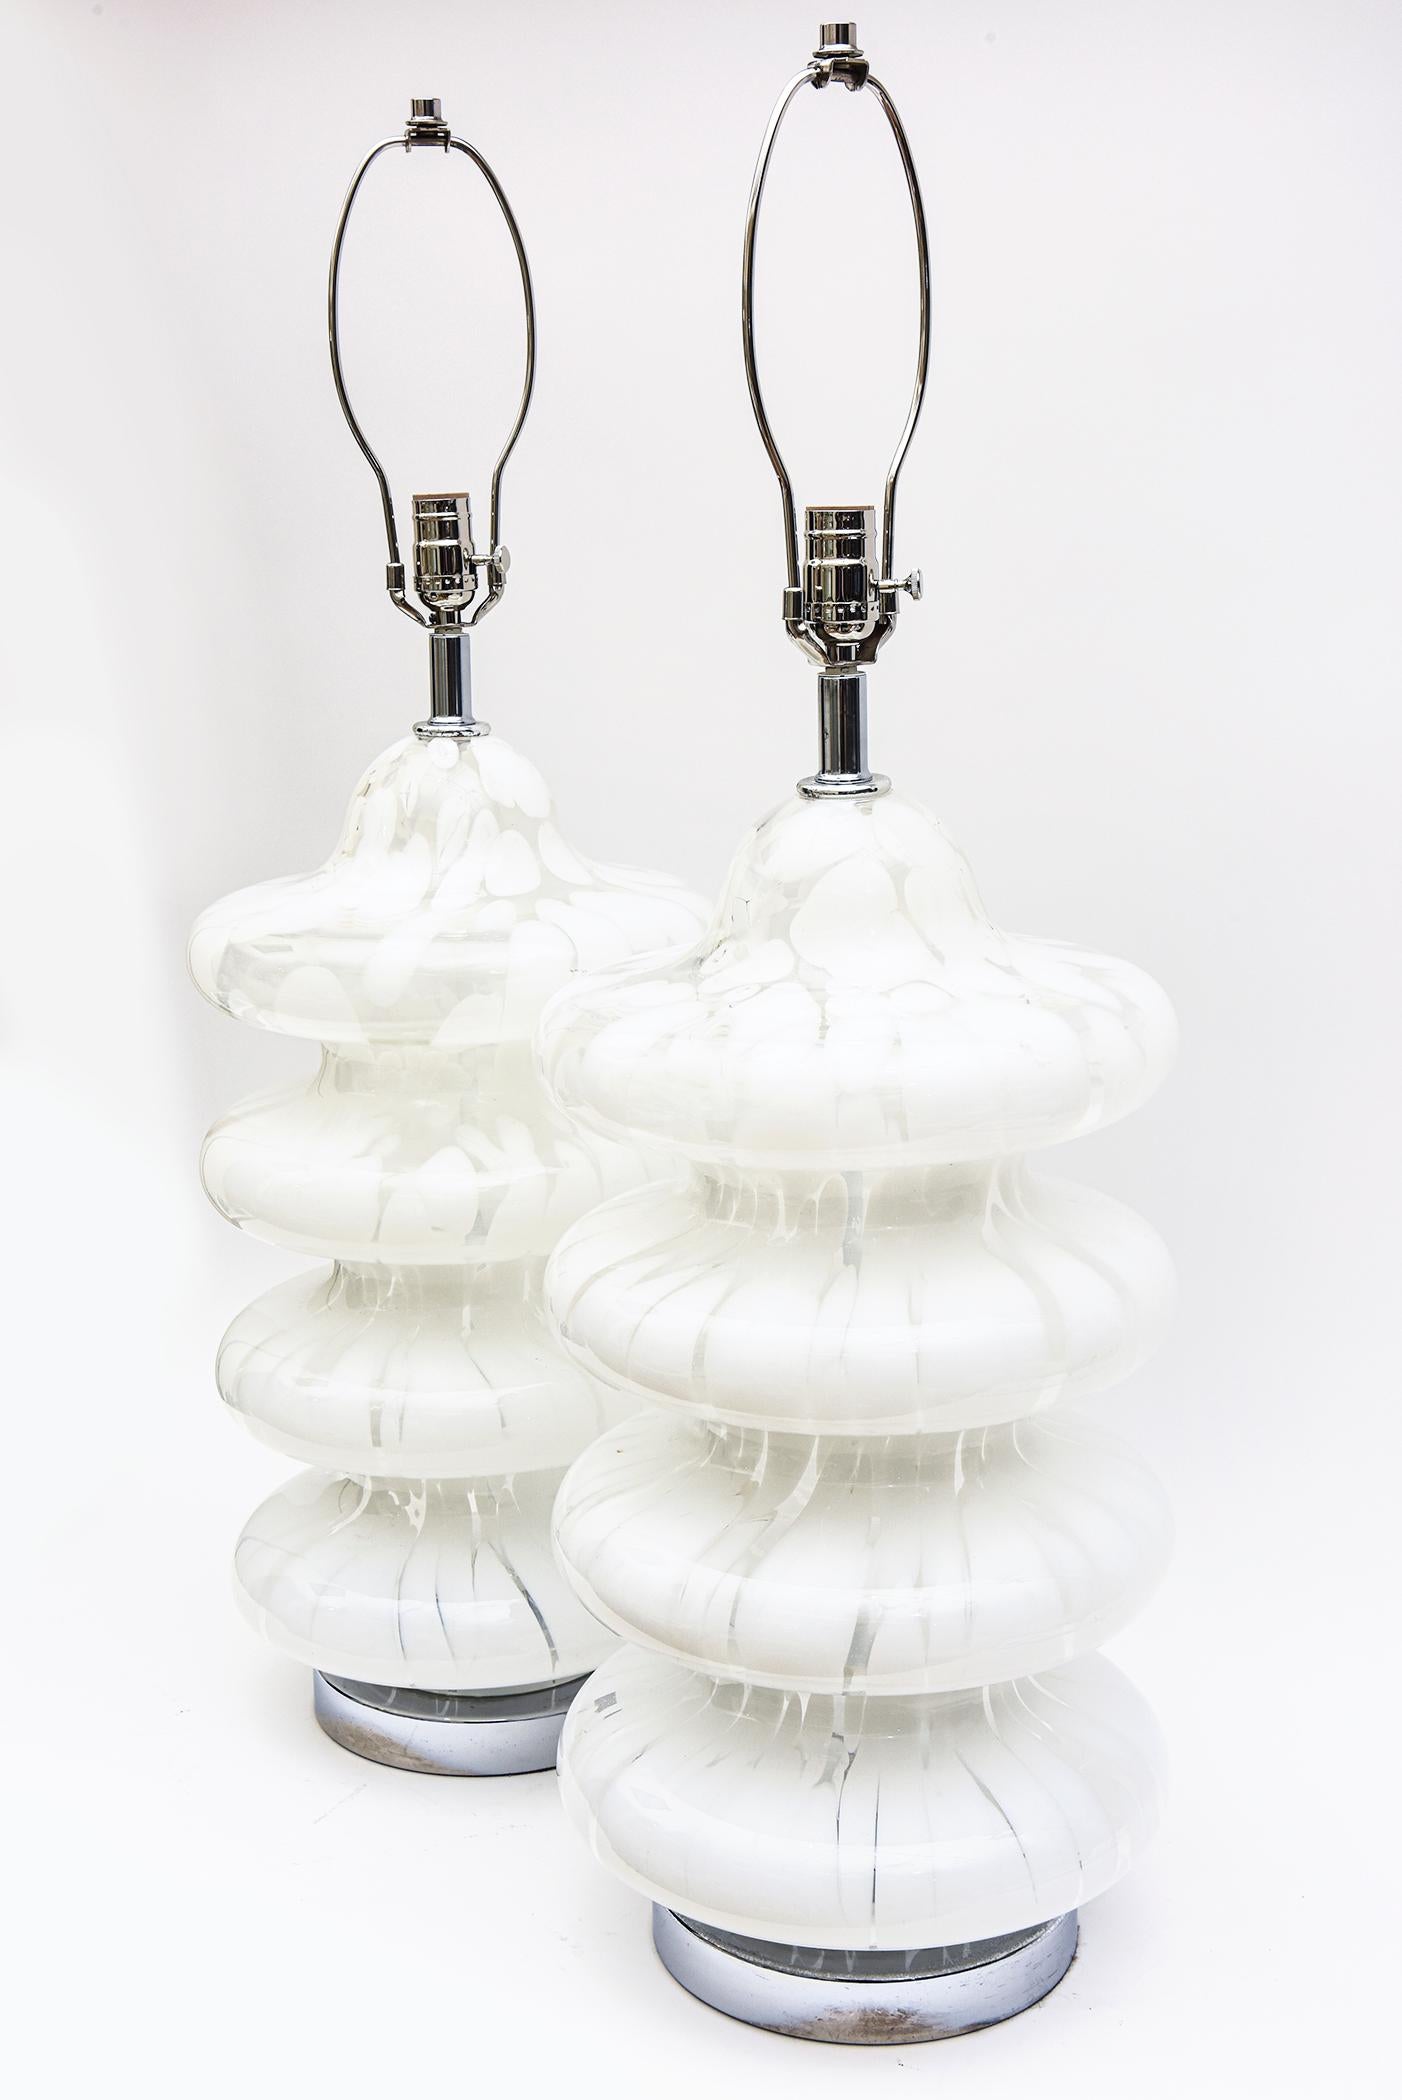 These vintage Italian 1970s Carlo Nason for Mazzega 4 tier Murano hand blown lamps are abstract patterns of mottled and random swirls of white and clear glass. They are coined the Pagoda lamps and are very iconic. They make a grand modern statement.